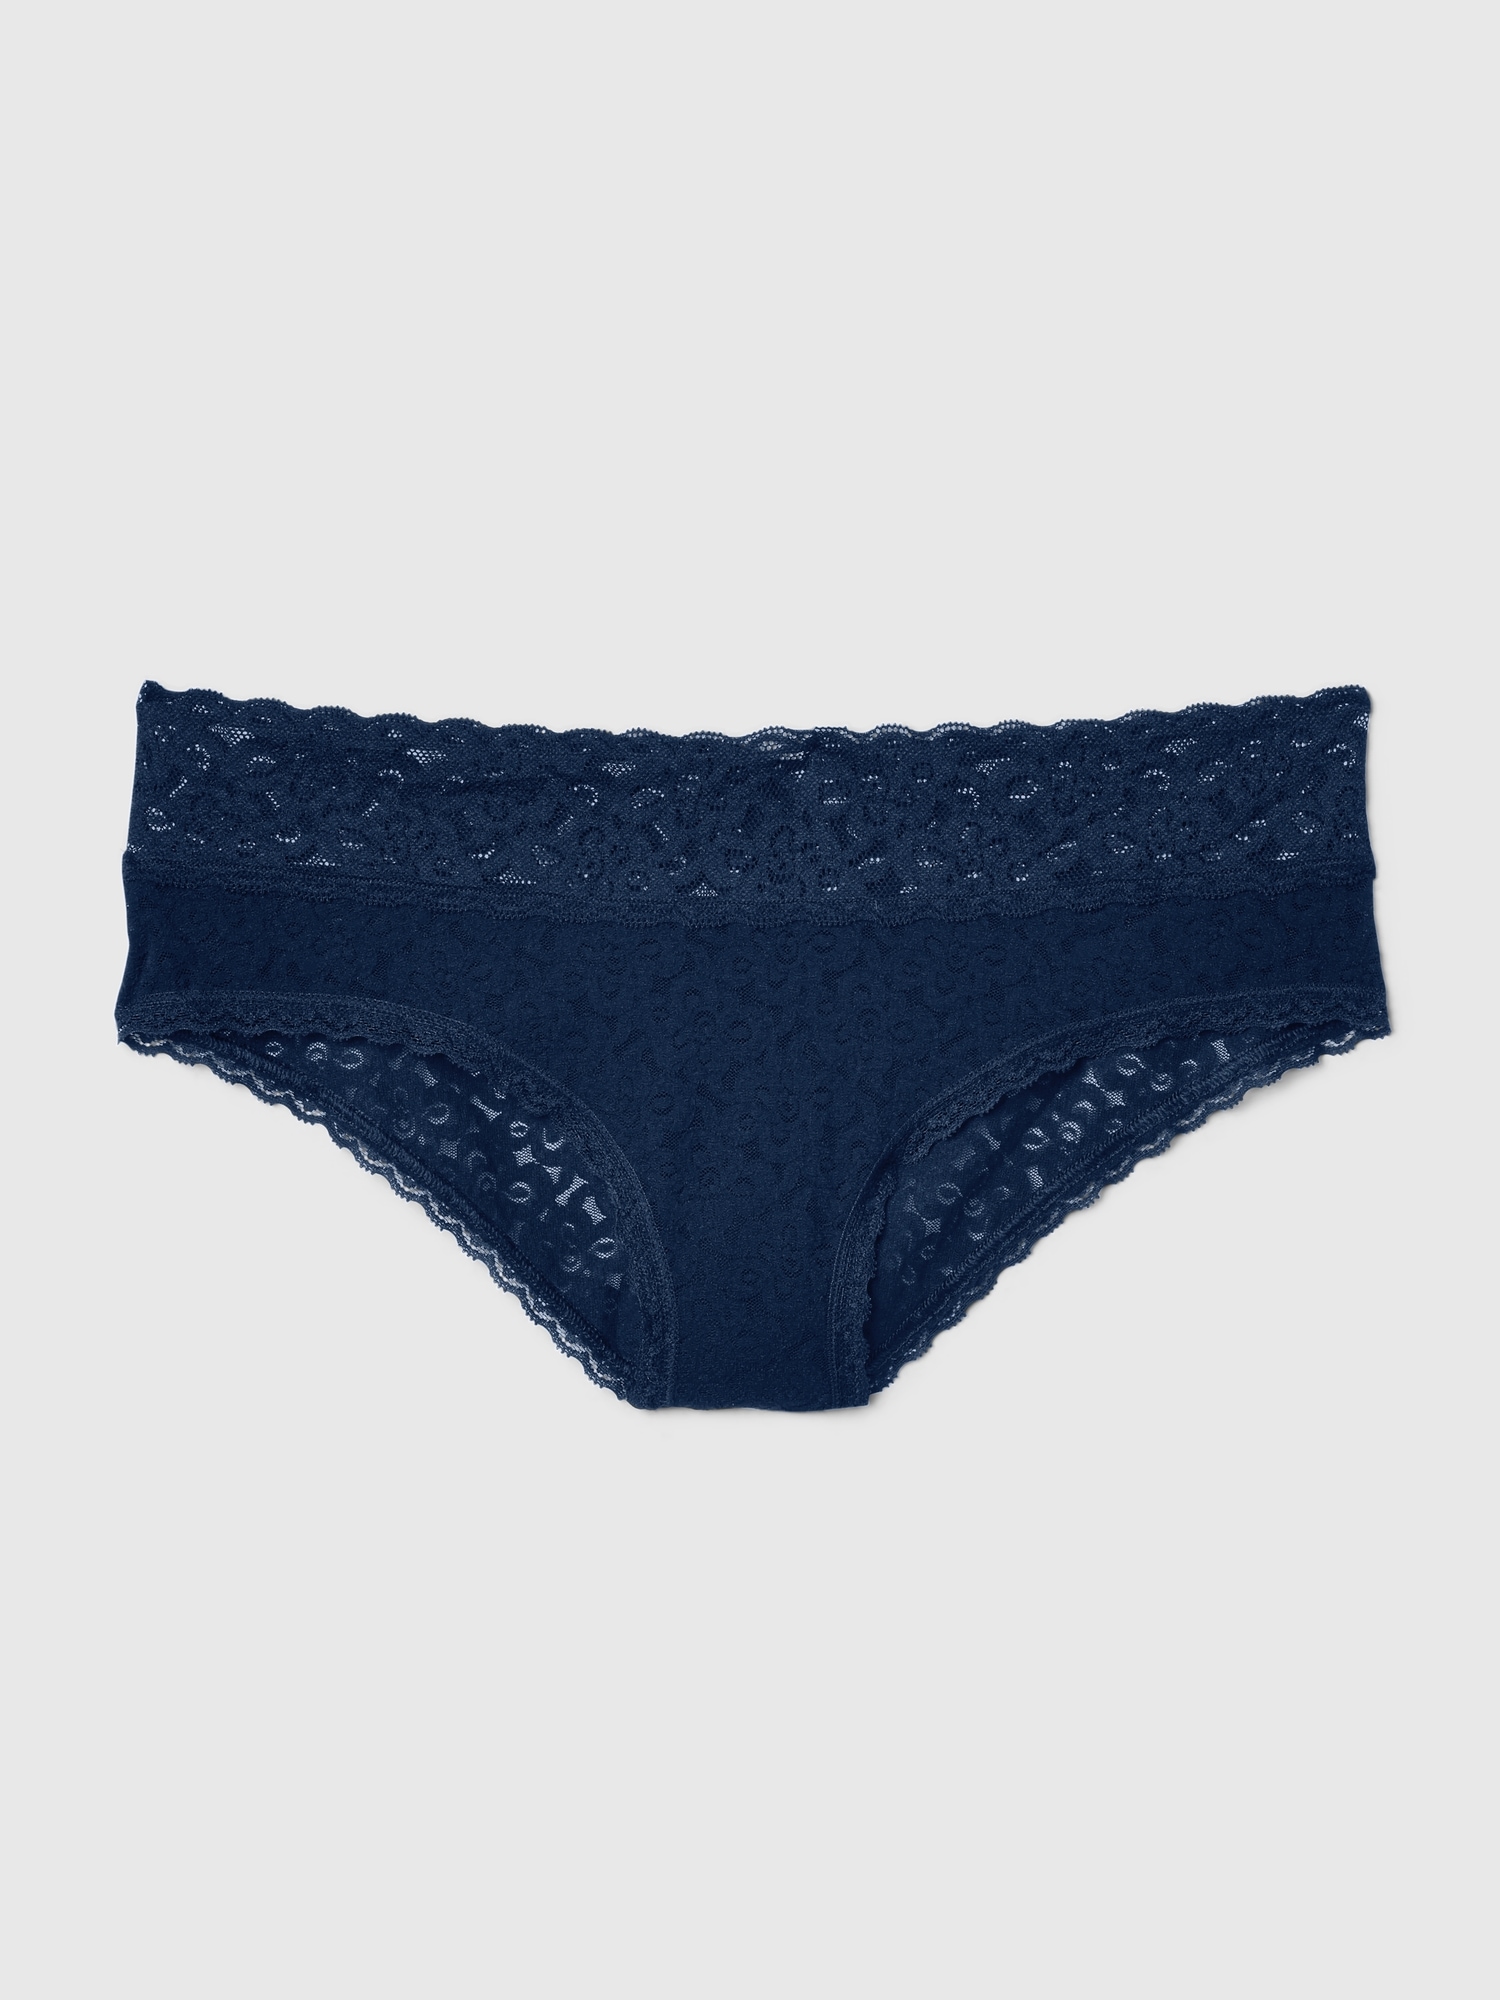 Gap Lace Cheeky (3-Pack) black - 644119063